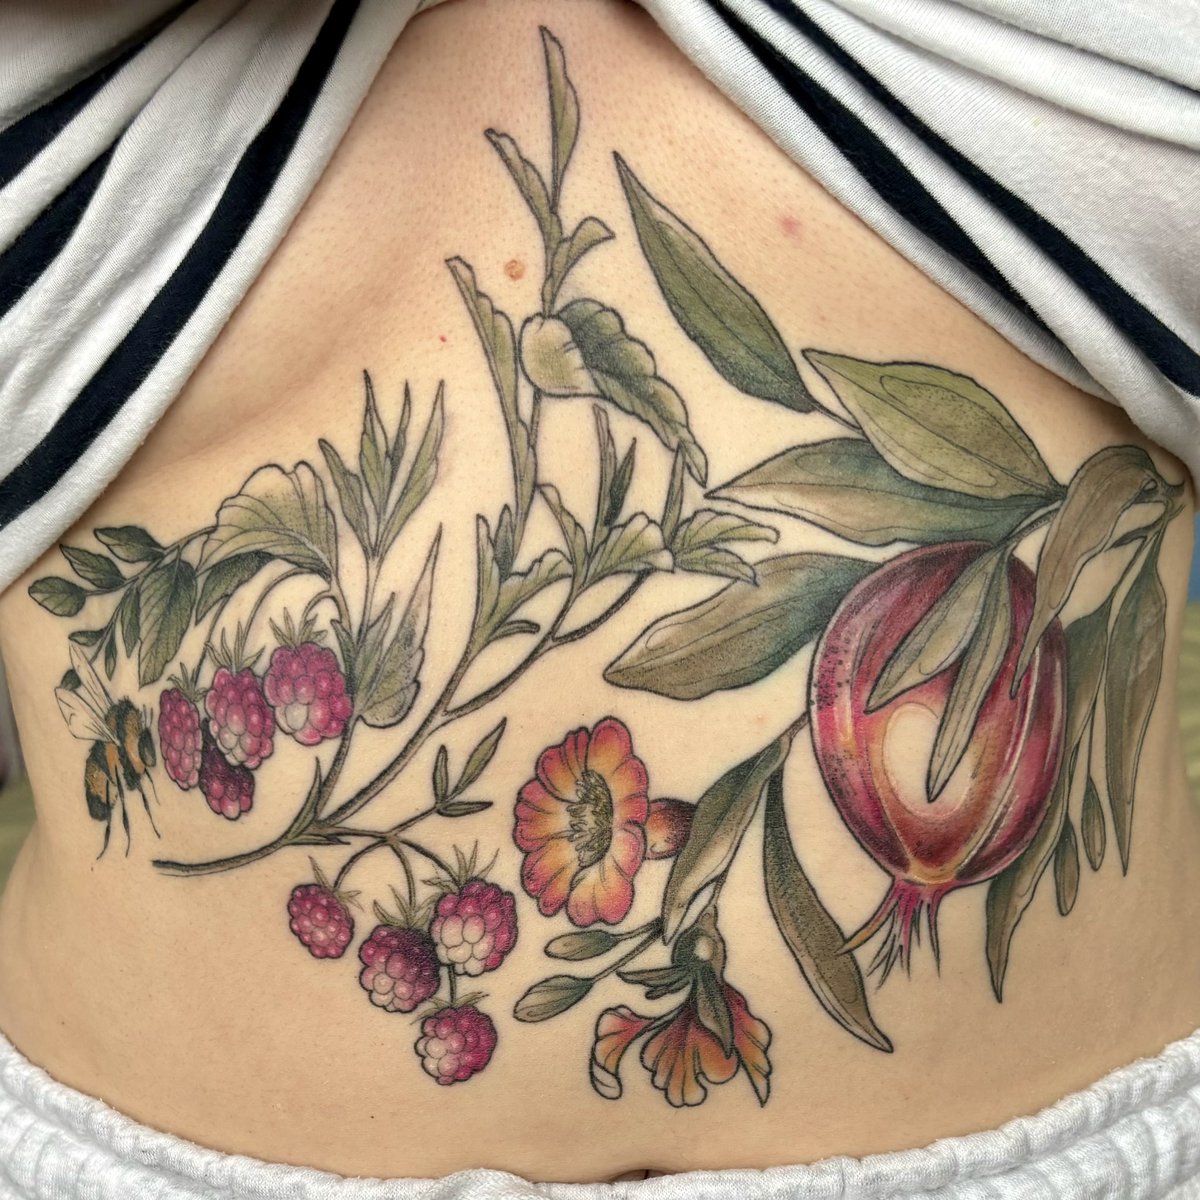 Forgot to say but I finally got rid of my god awful fucking ribs tattoo that I’ve hated for years and now I have this beauty and I’m so in love! Big up Inkvisible Laser Removal and Jen at Den of Iniquity, absolute heroes honestly 🥰